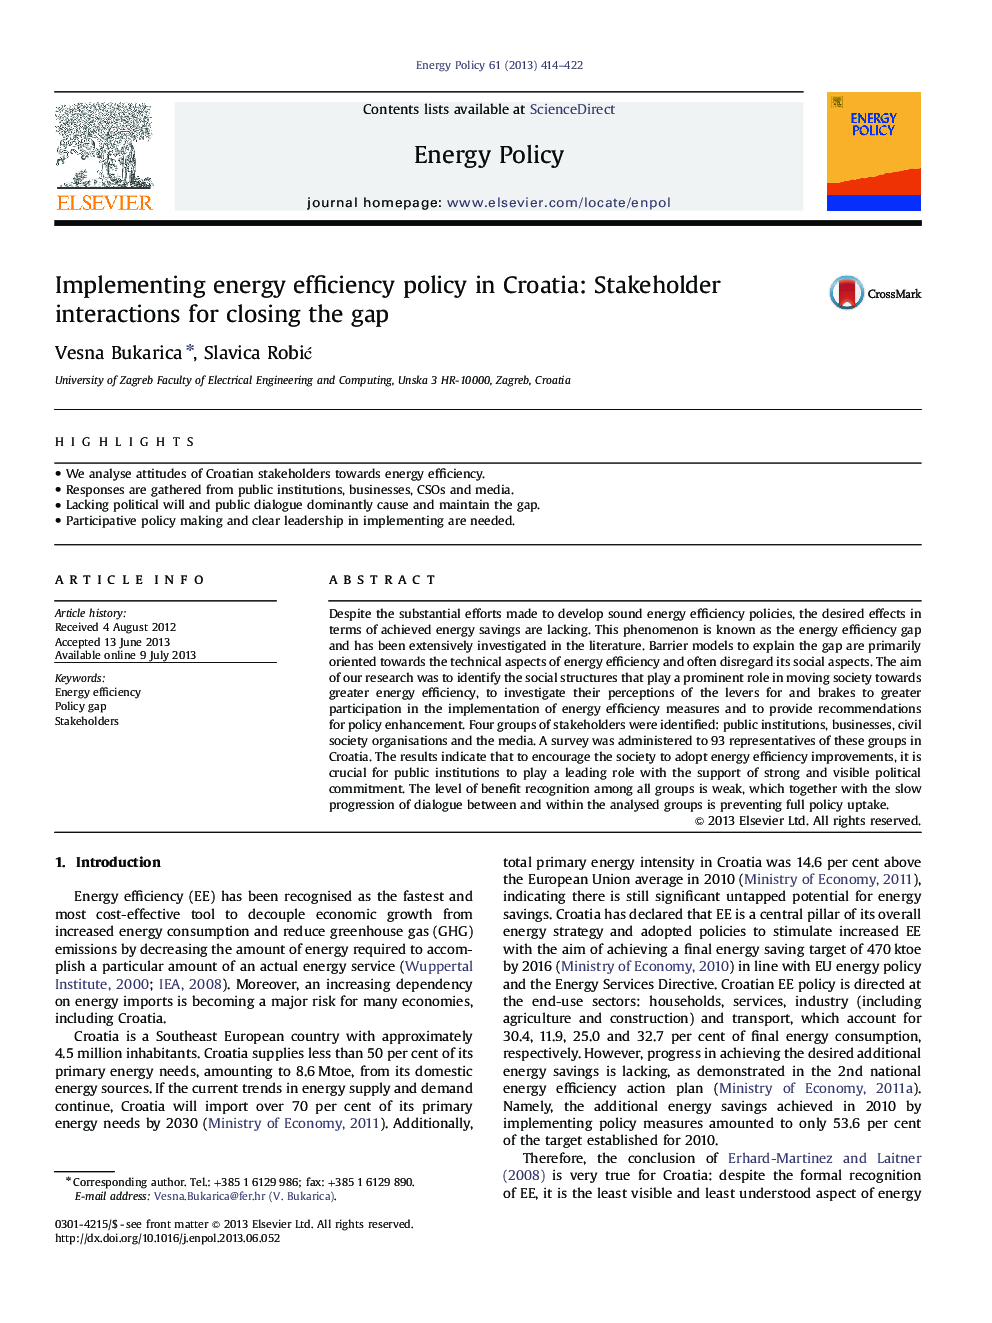 Implementing energy efficiency policy in Croatia: Stakeholder interactions for closing the gap